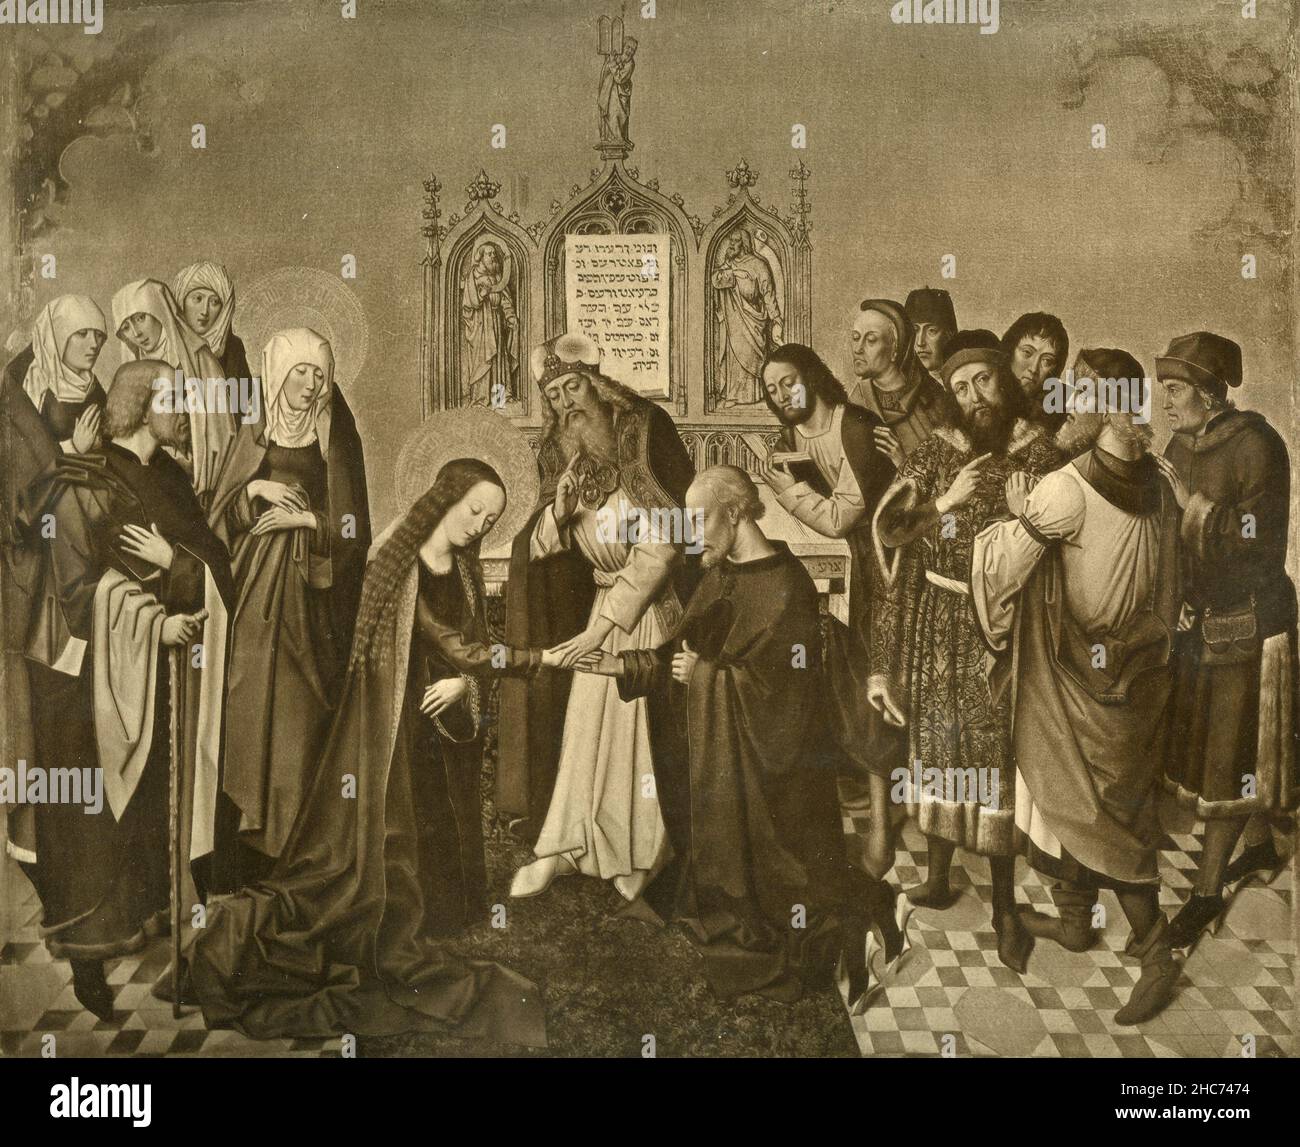 Wedding of the Virgin Mary, painting by German artist Meister des Marienlebens, Munich 1897 Stock Photo